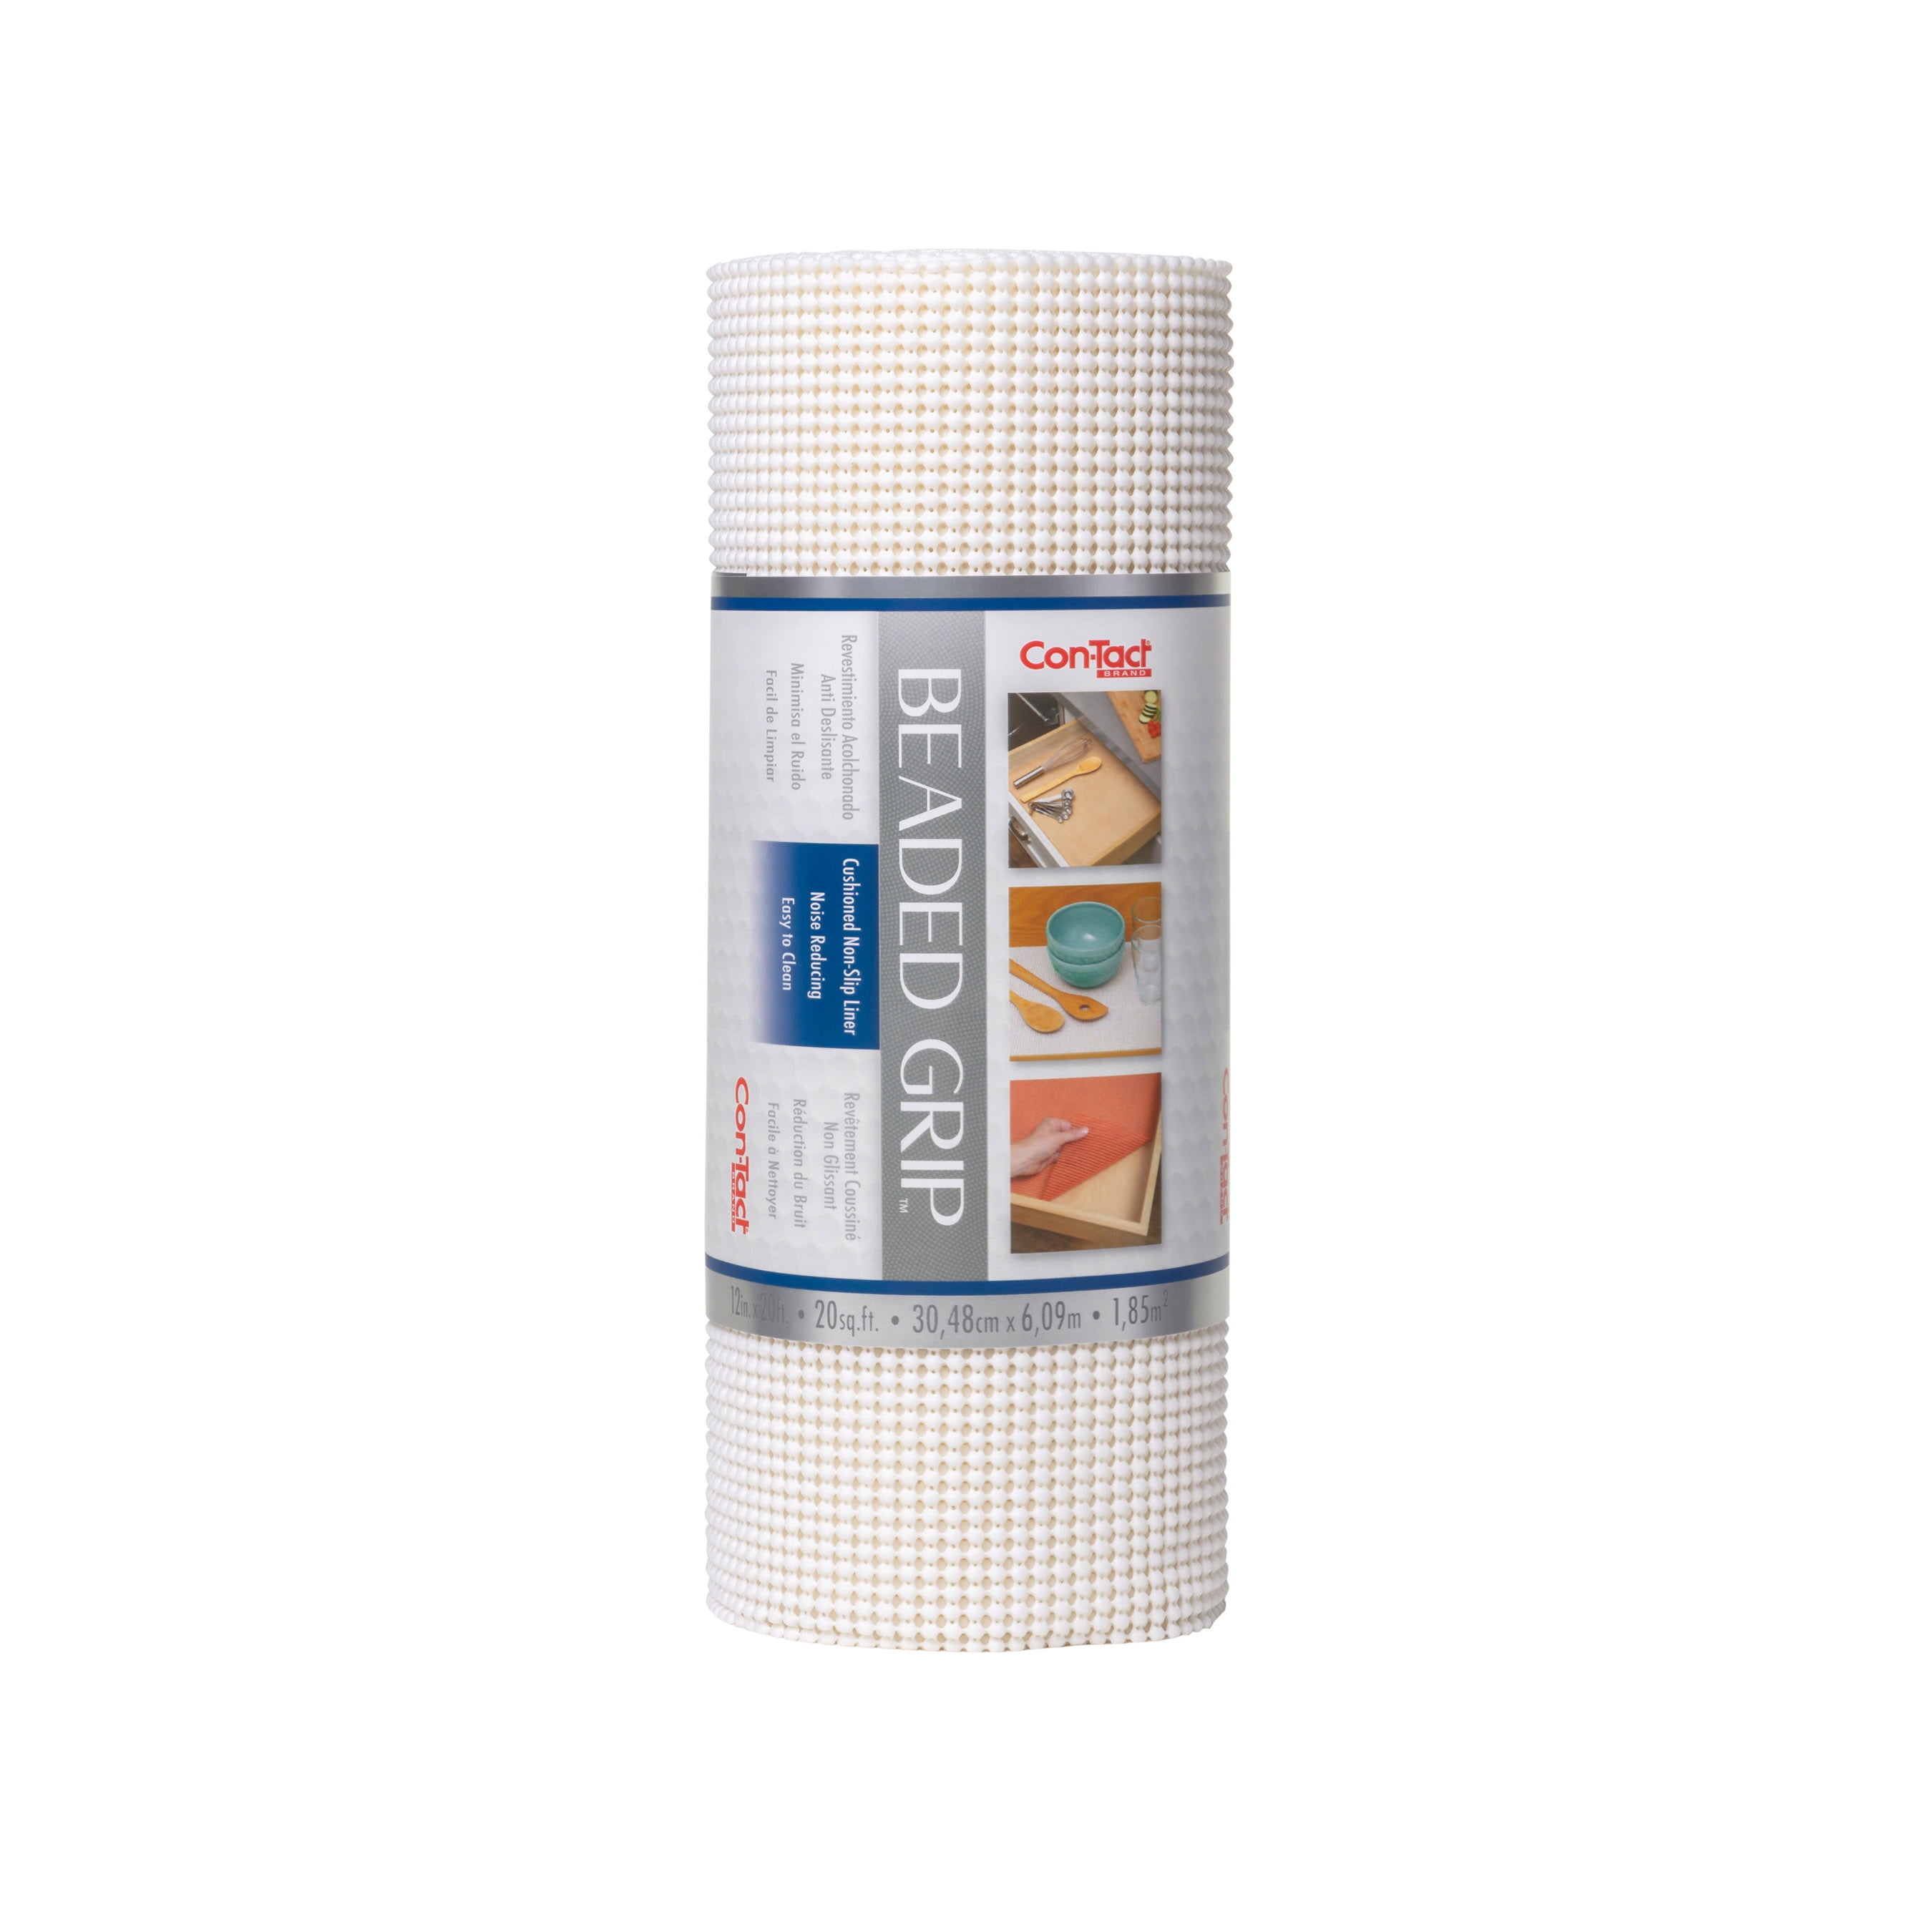 6 Rolls 12 x 5 White Con-Tact Brand Grip Prints Non-Adhesive Contact Shelf and Drawer Liner 